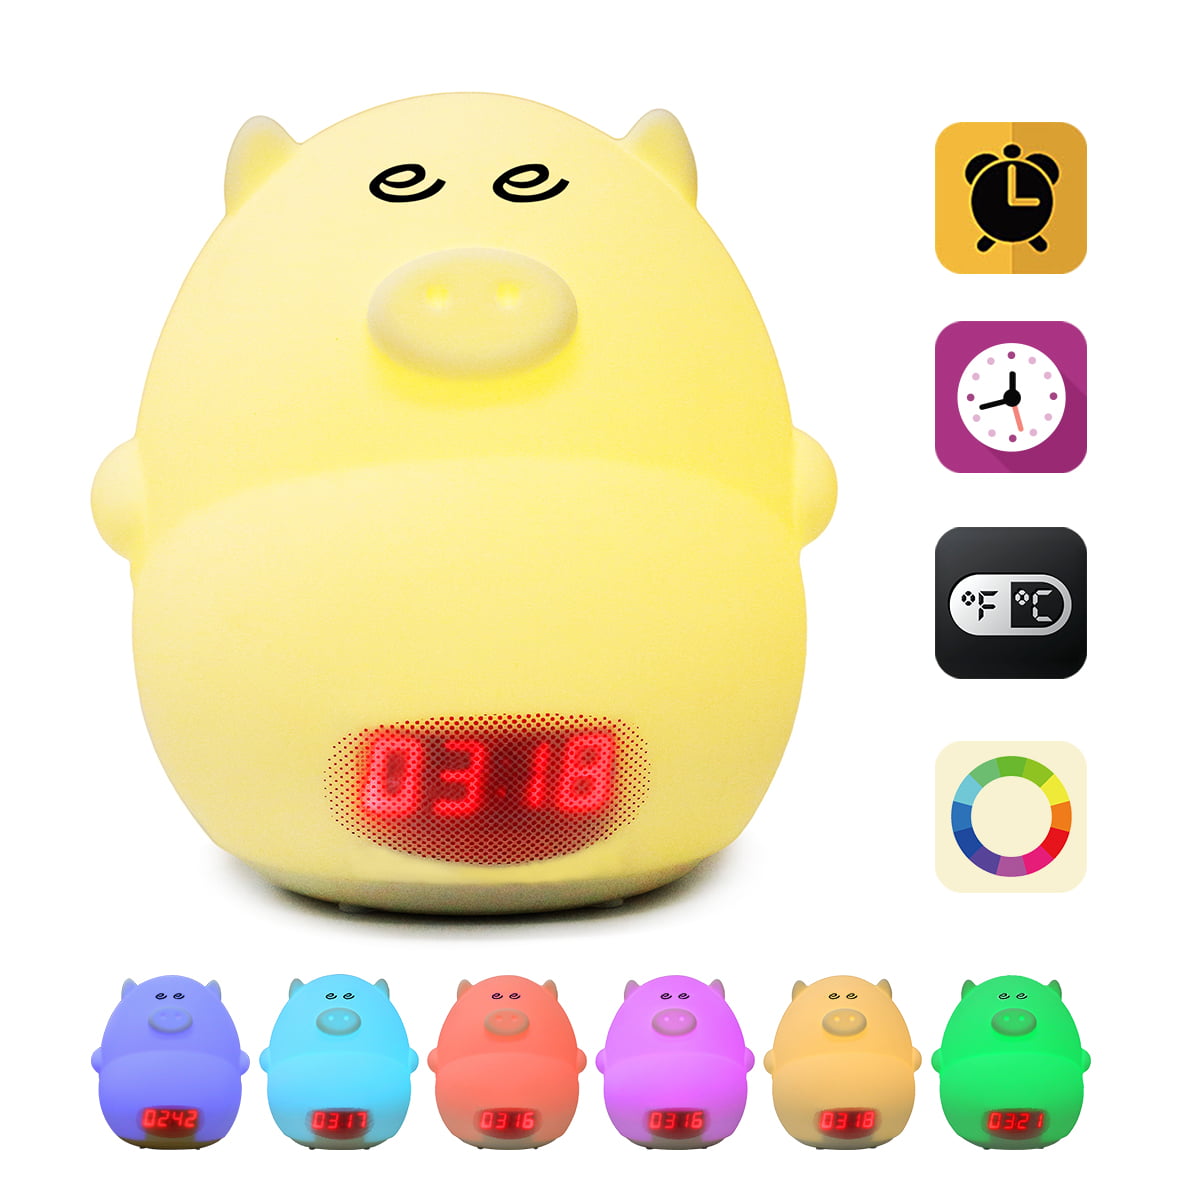 Details about   Resin Table Night Light LED Changing Bedroom Child Gift Cute Pig 